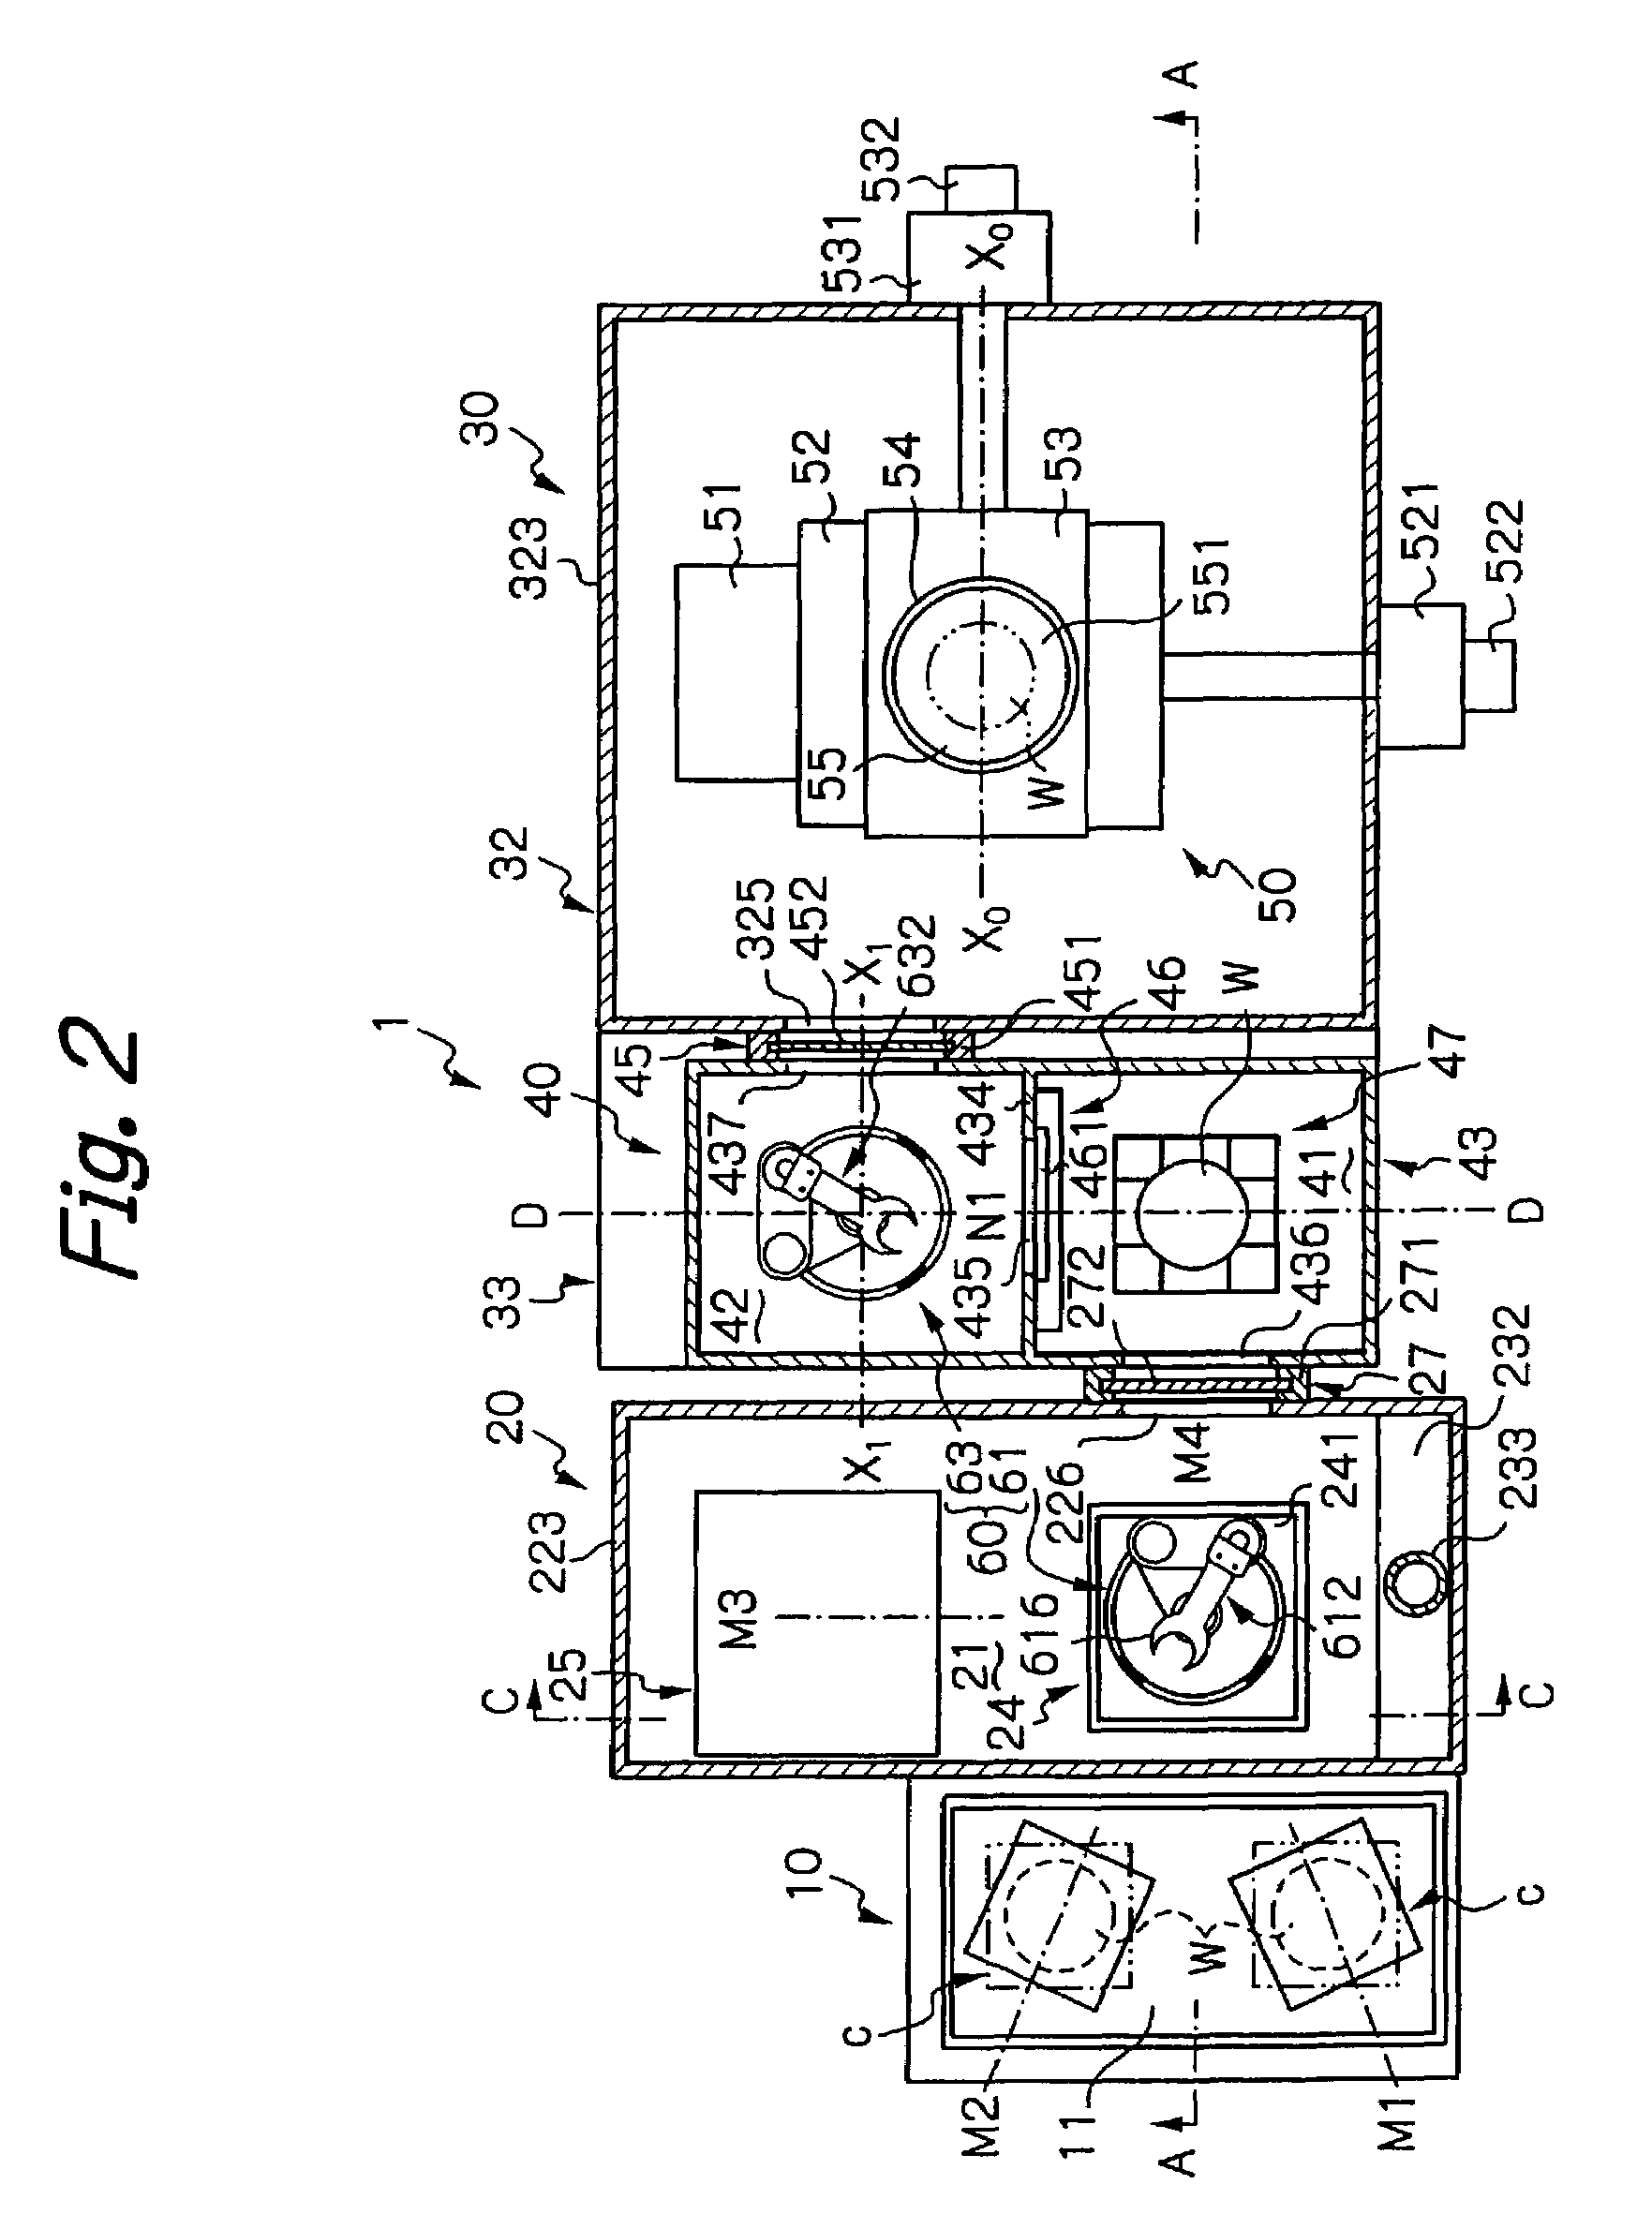 Electron beam apparatus and device fabrication method using the electron beam apparatus